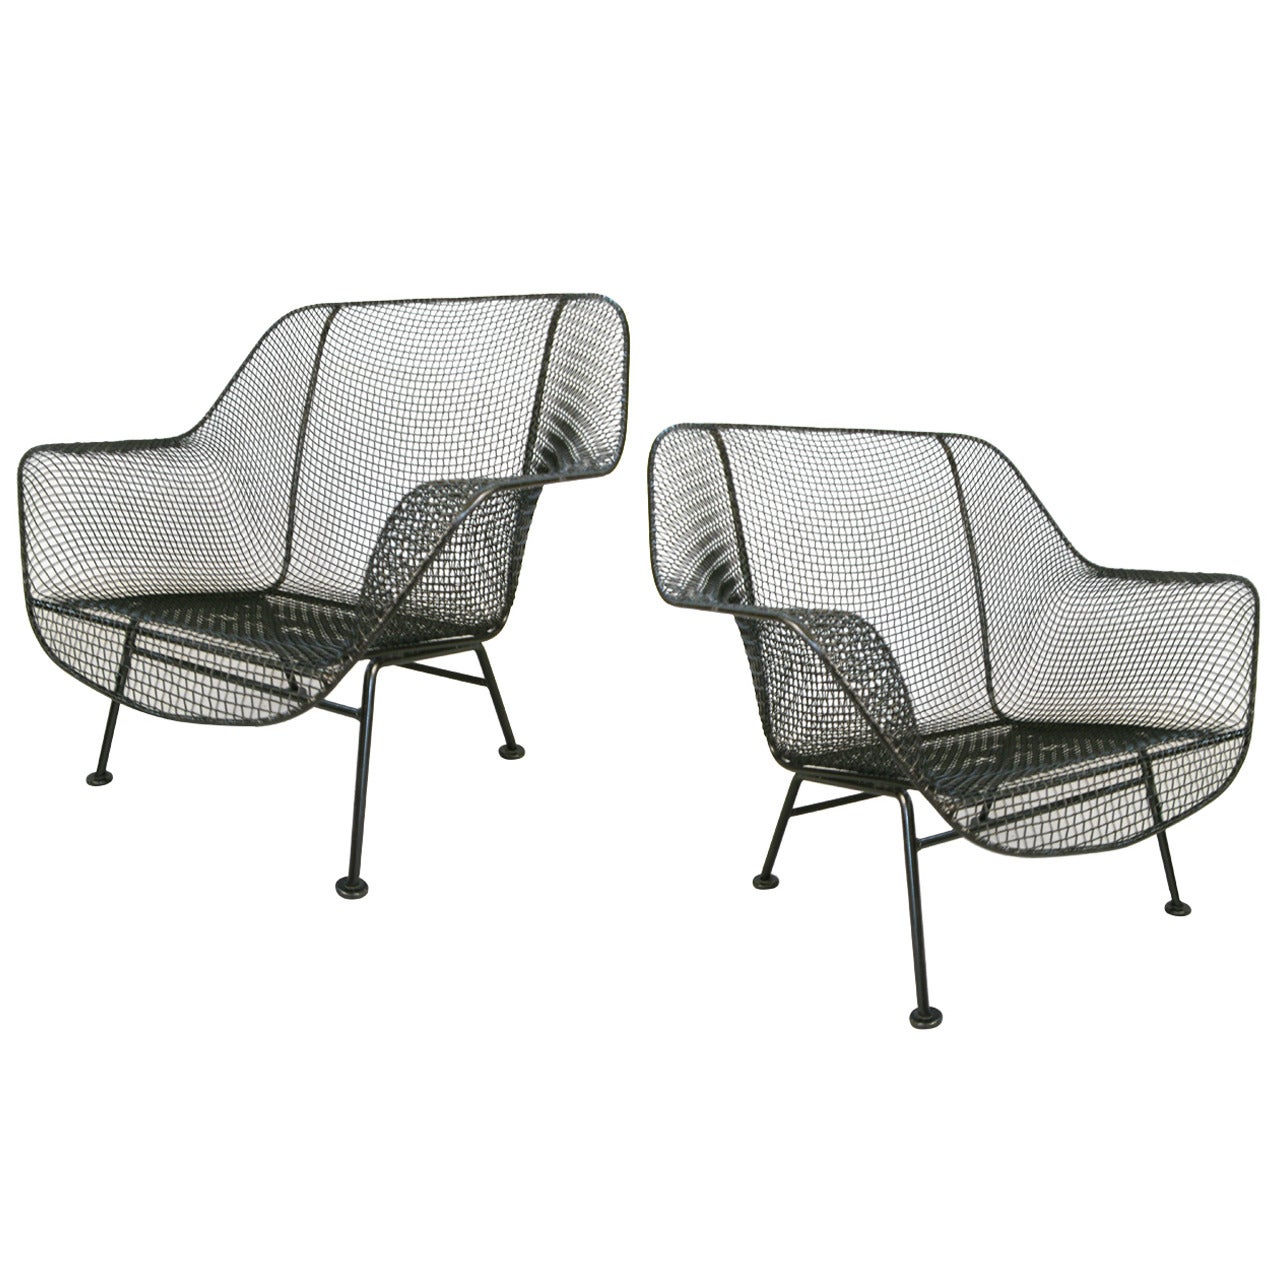 Pair of Vintage 1950s 'Sculptura' Garden Lounge Chairs by Russell Woodard